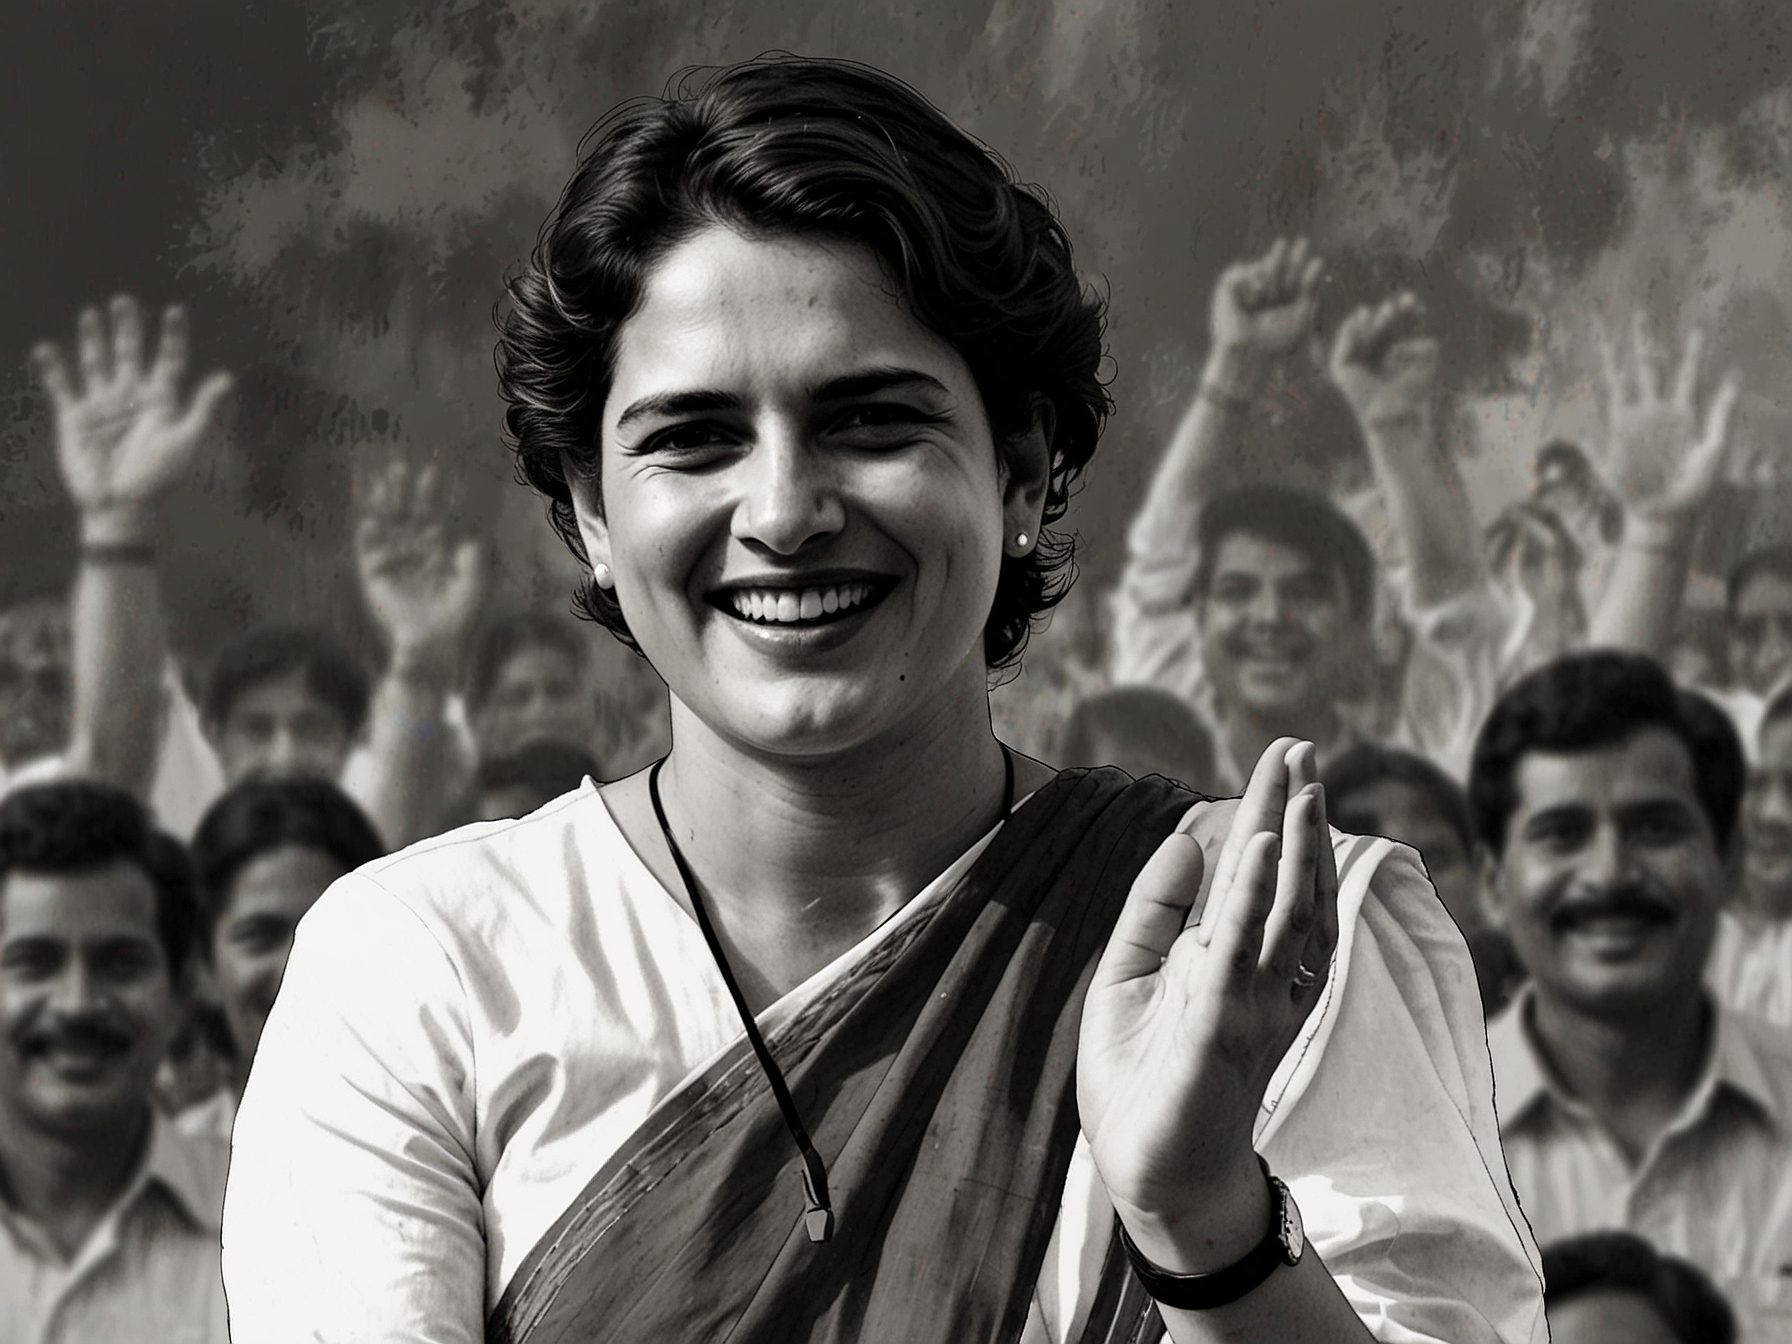 Priyanka Gandhi smiling and waving at a political rally in Kerala, engaging with the crowd with her characteristic charisma, symbolizing her campaign efforts in Wayanad.